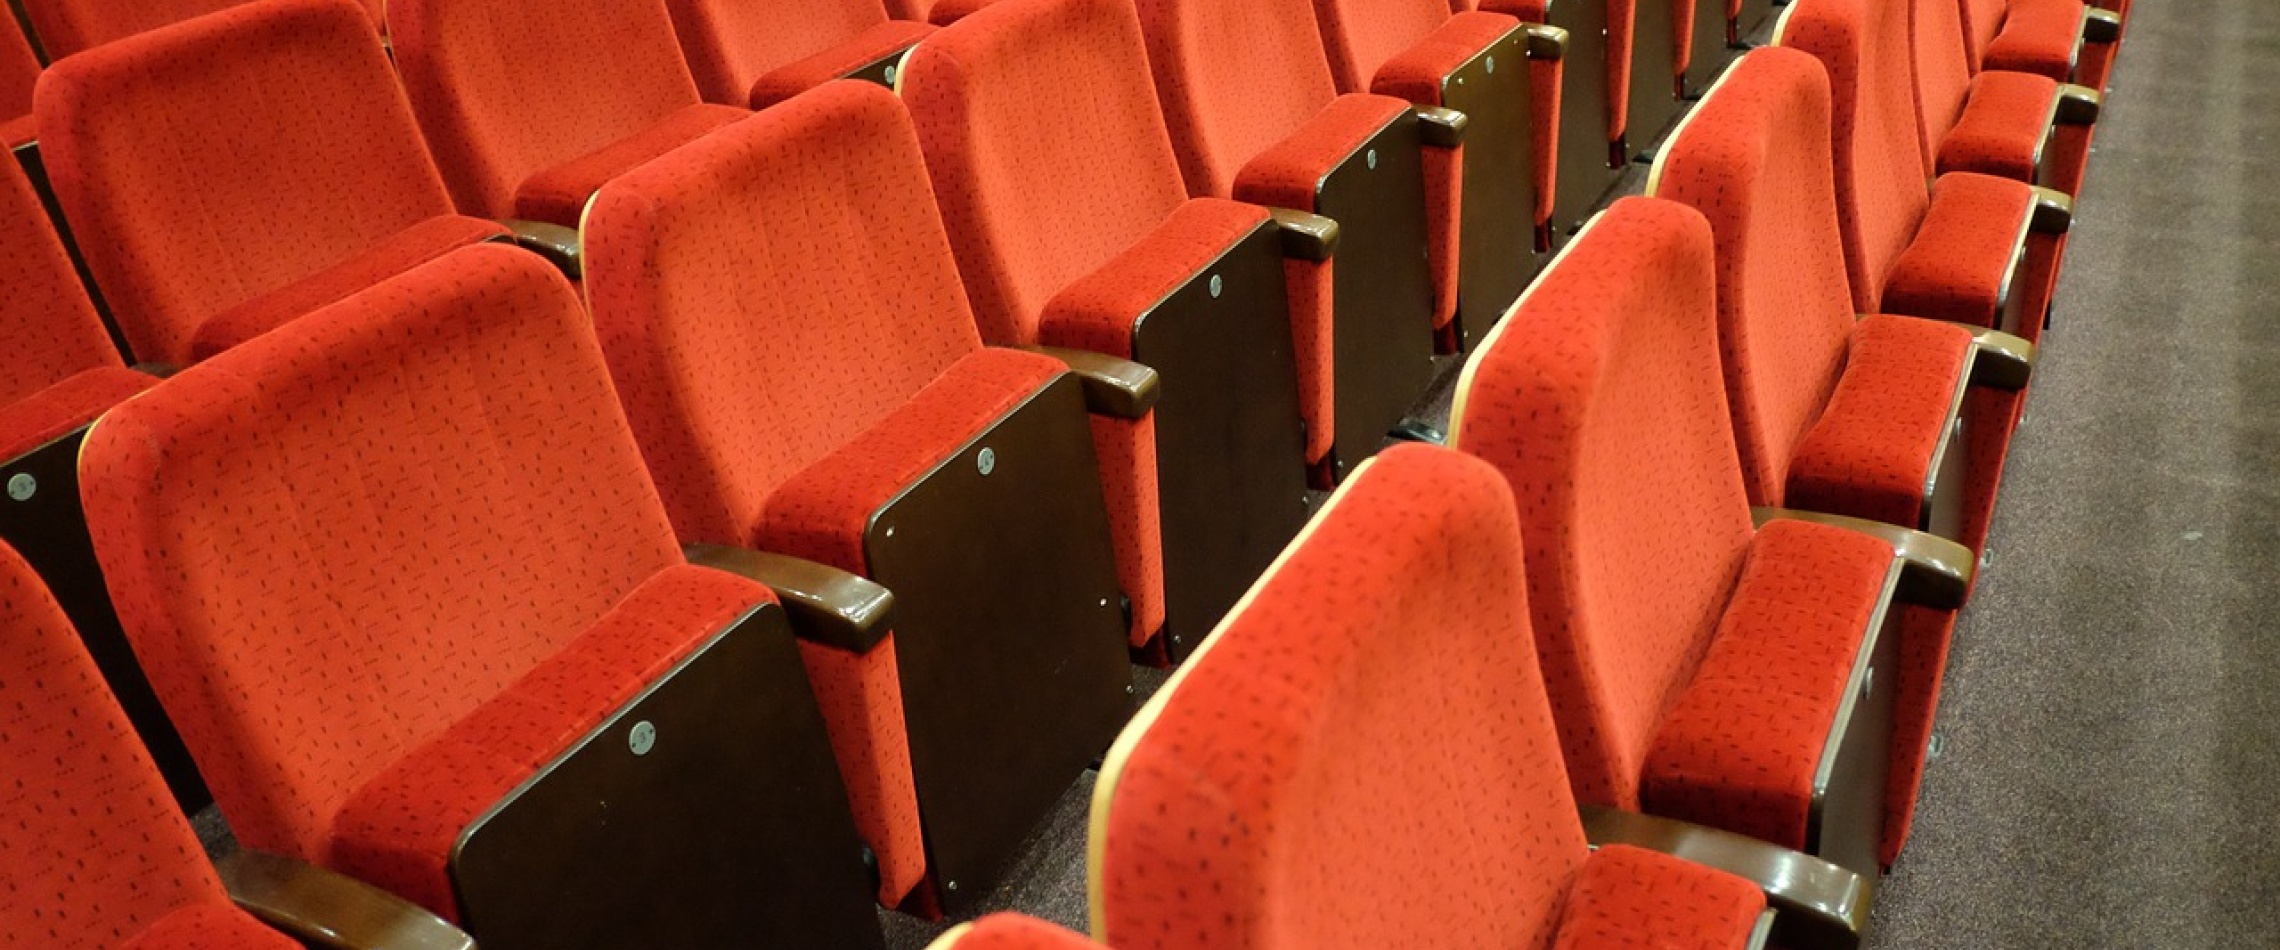 Theater seating